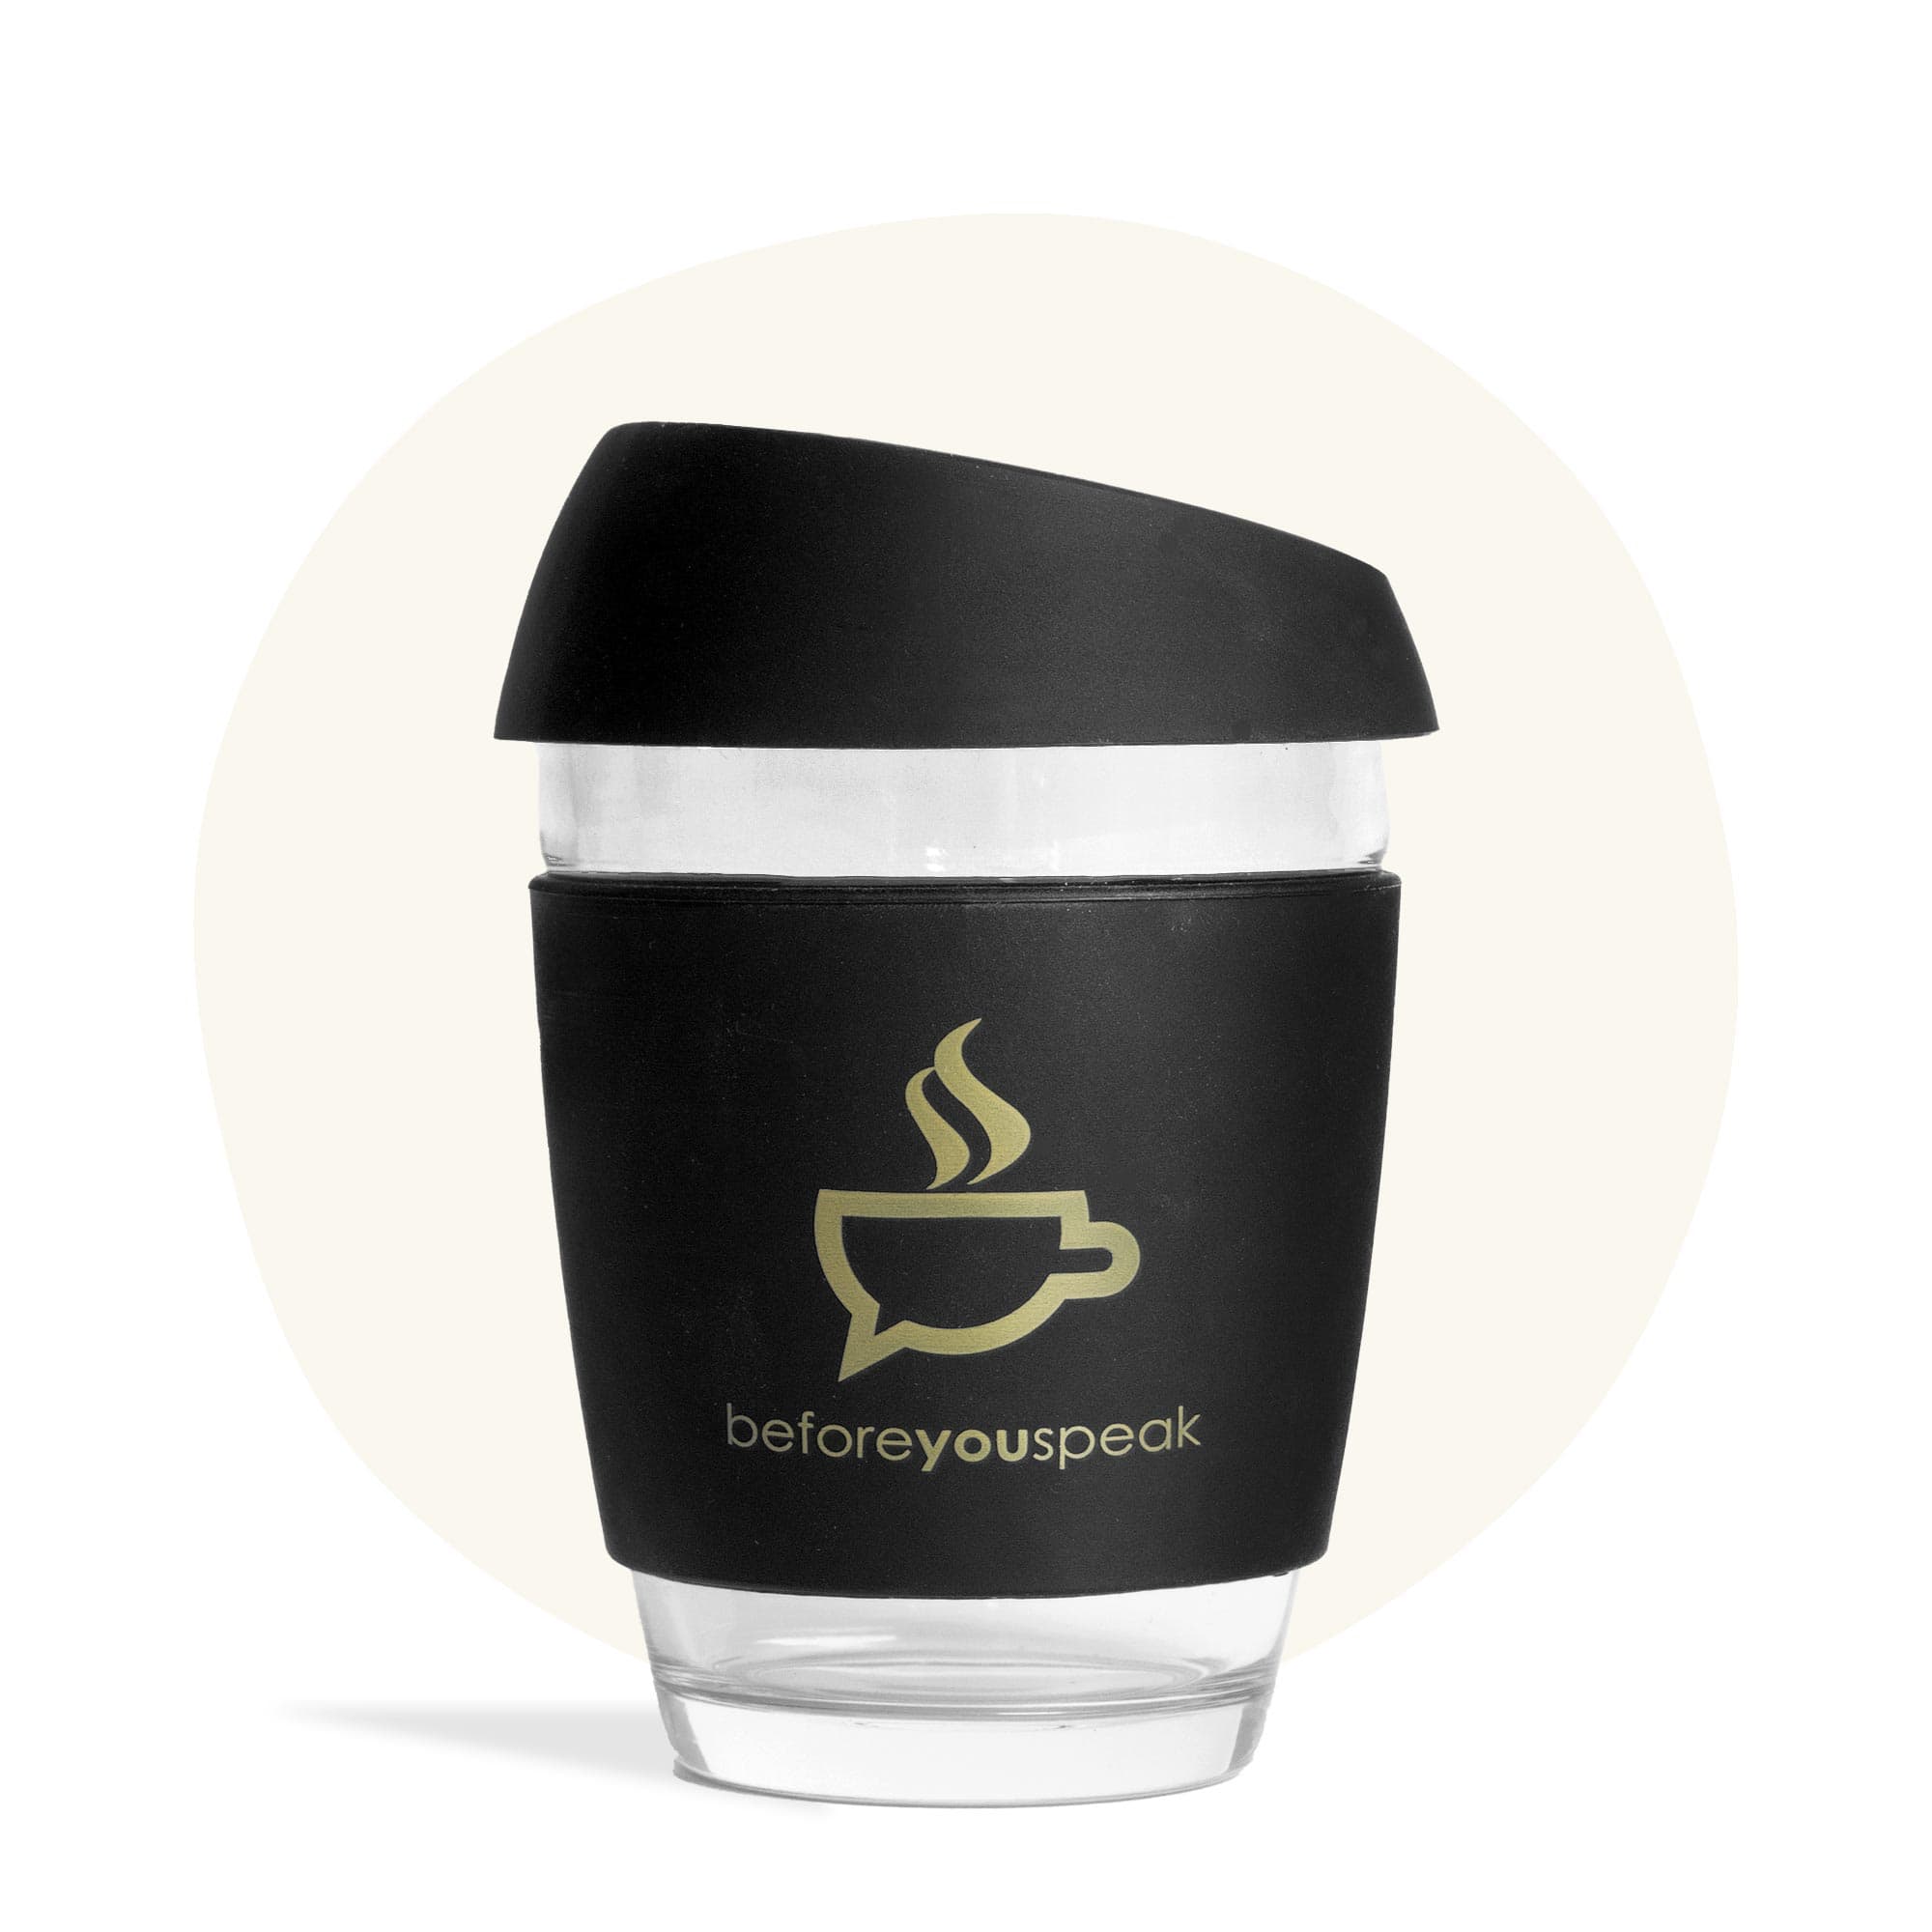 Yuggen Glass Travel Coffee Cup  Endlessly reusable 100% plastic-free